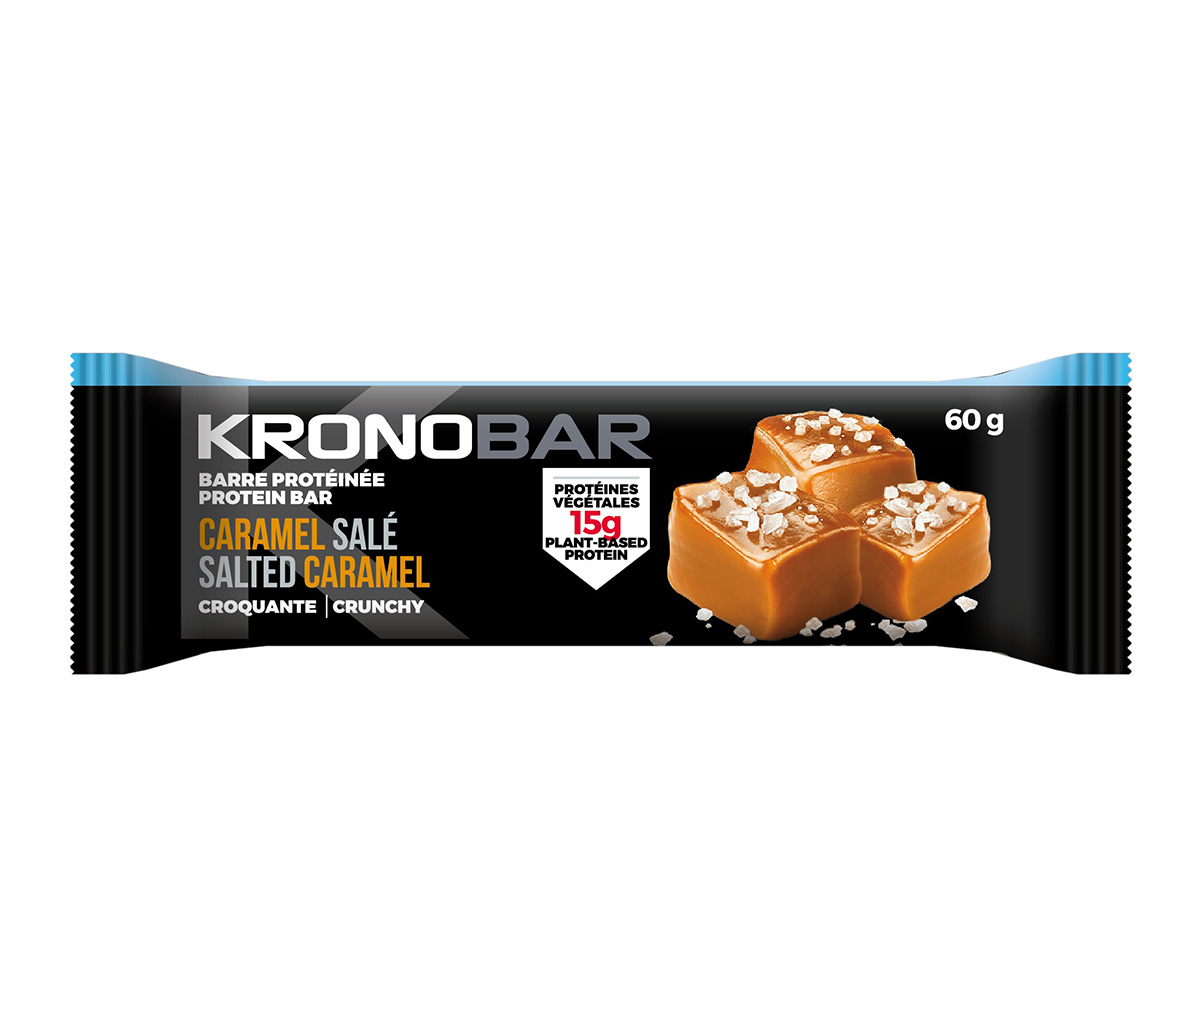 Image 12 salted caramel protein bars (60g)15g of protein